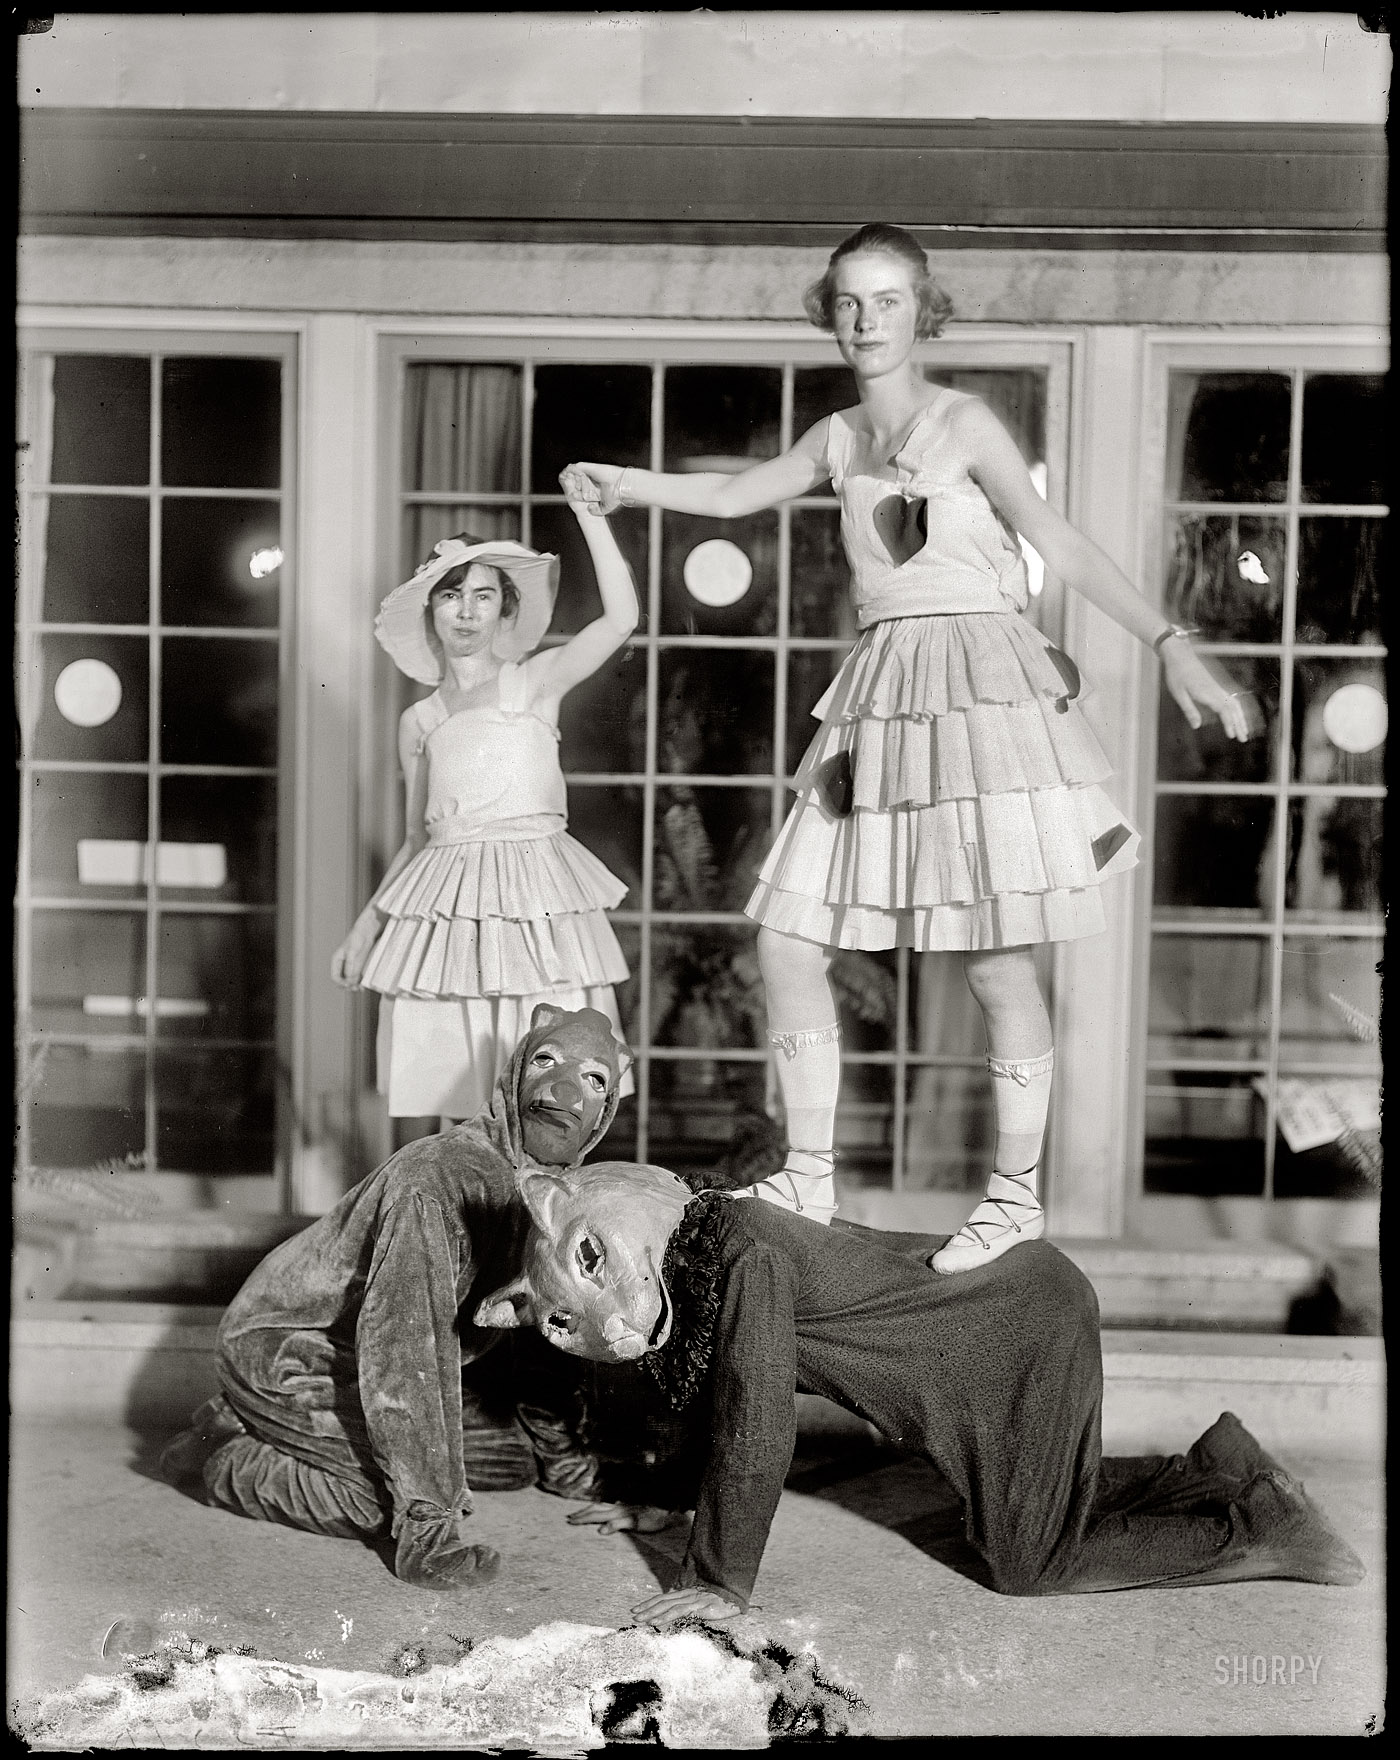 Washington, D.C., circa 1925. "Y.W.C.A. Circus." Another scene from the Terrifying Party. Harris & Ewing Collection glass negative. View full size.